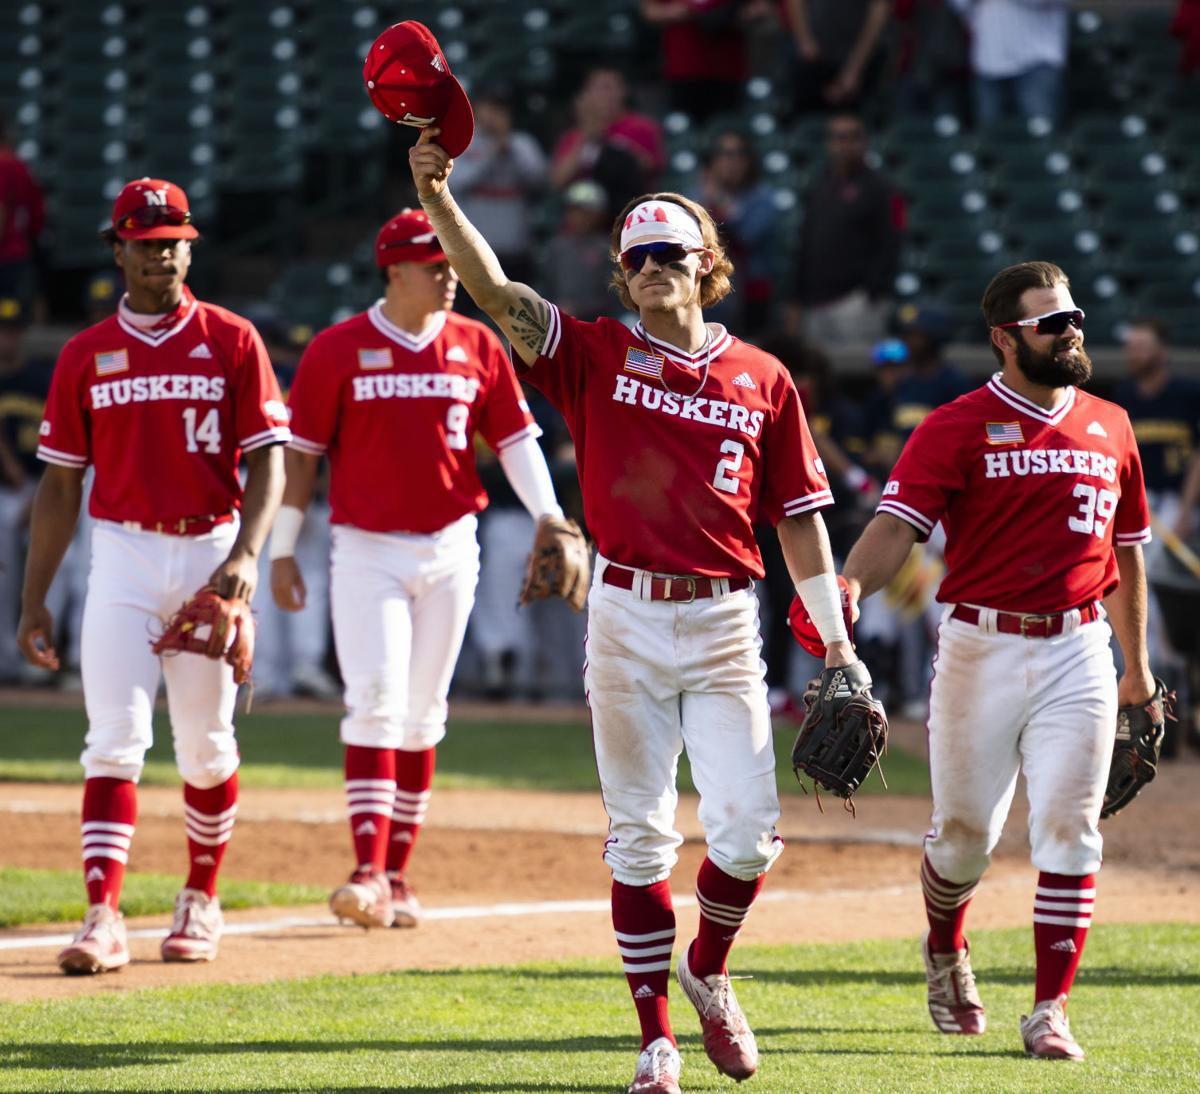 I think these baseball uniforms are SWEET! : r/Huskers